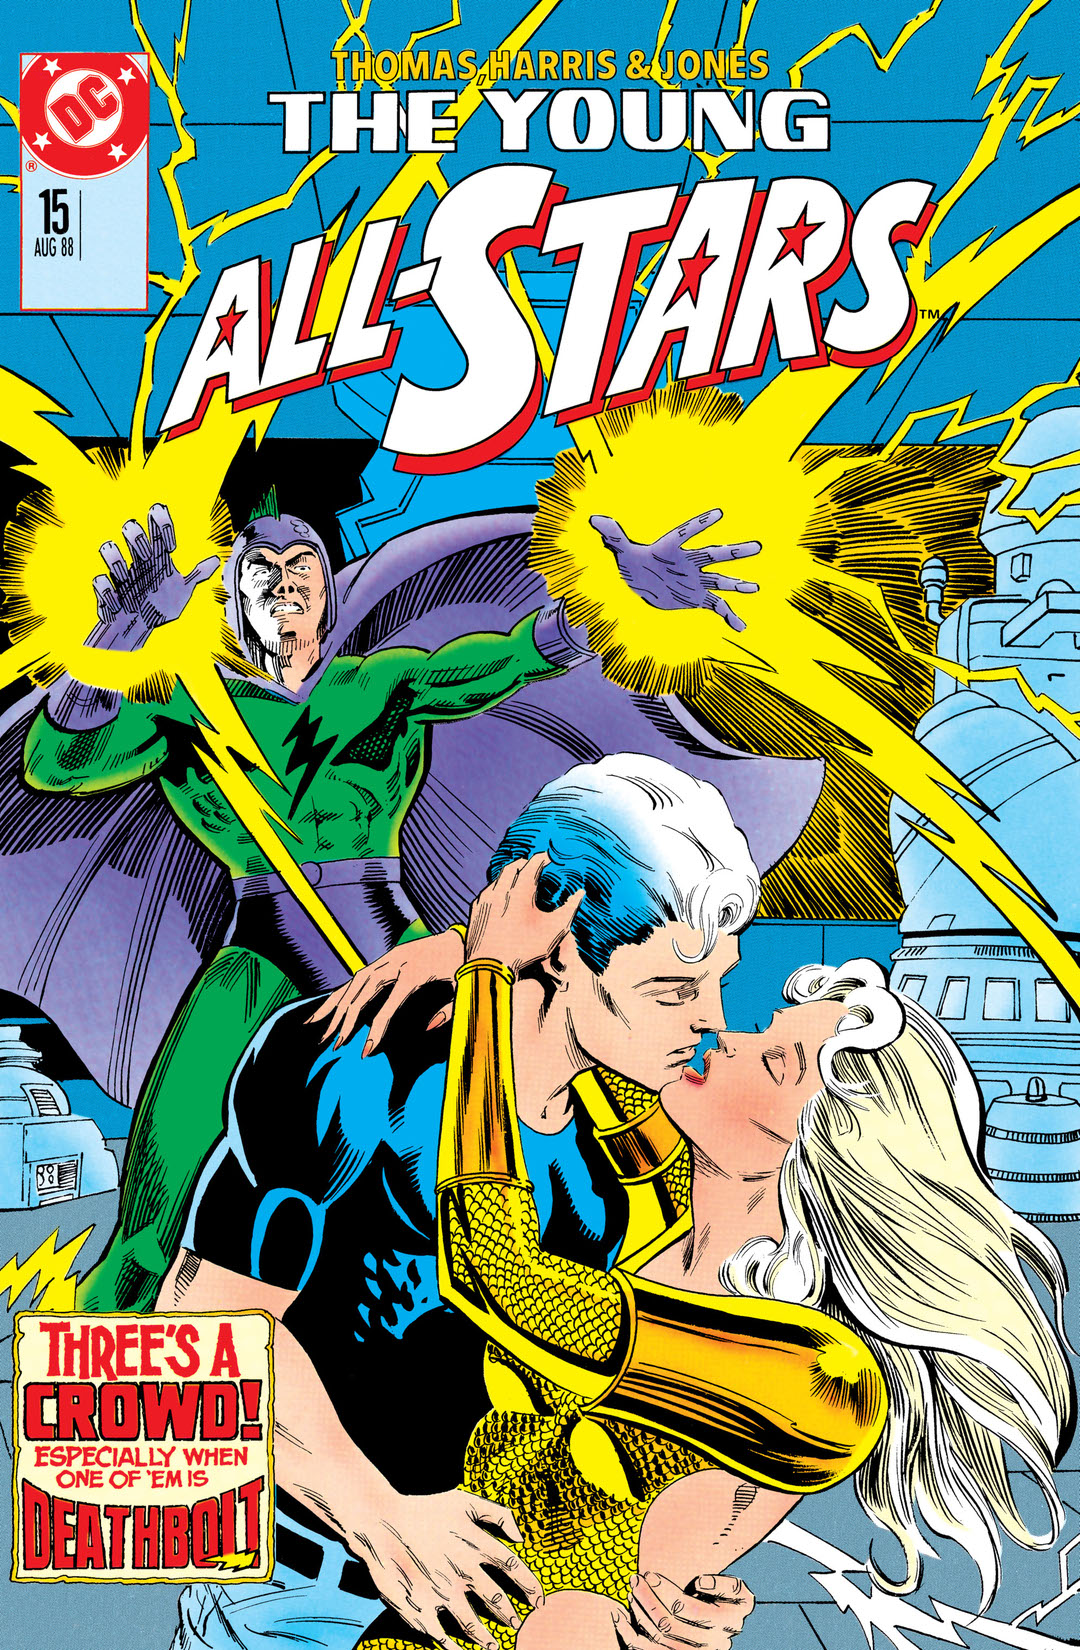 Young All-Stars #15 preview images